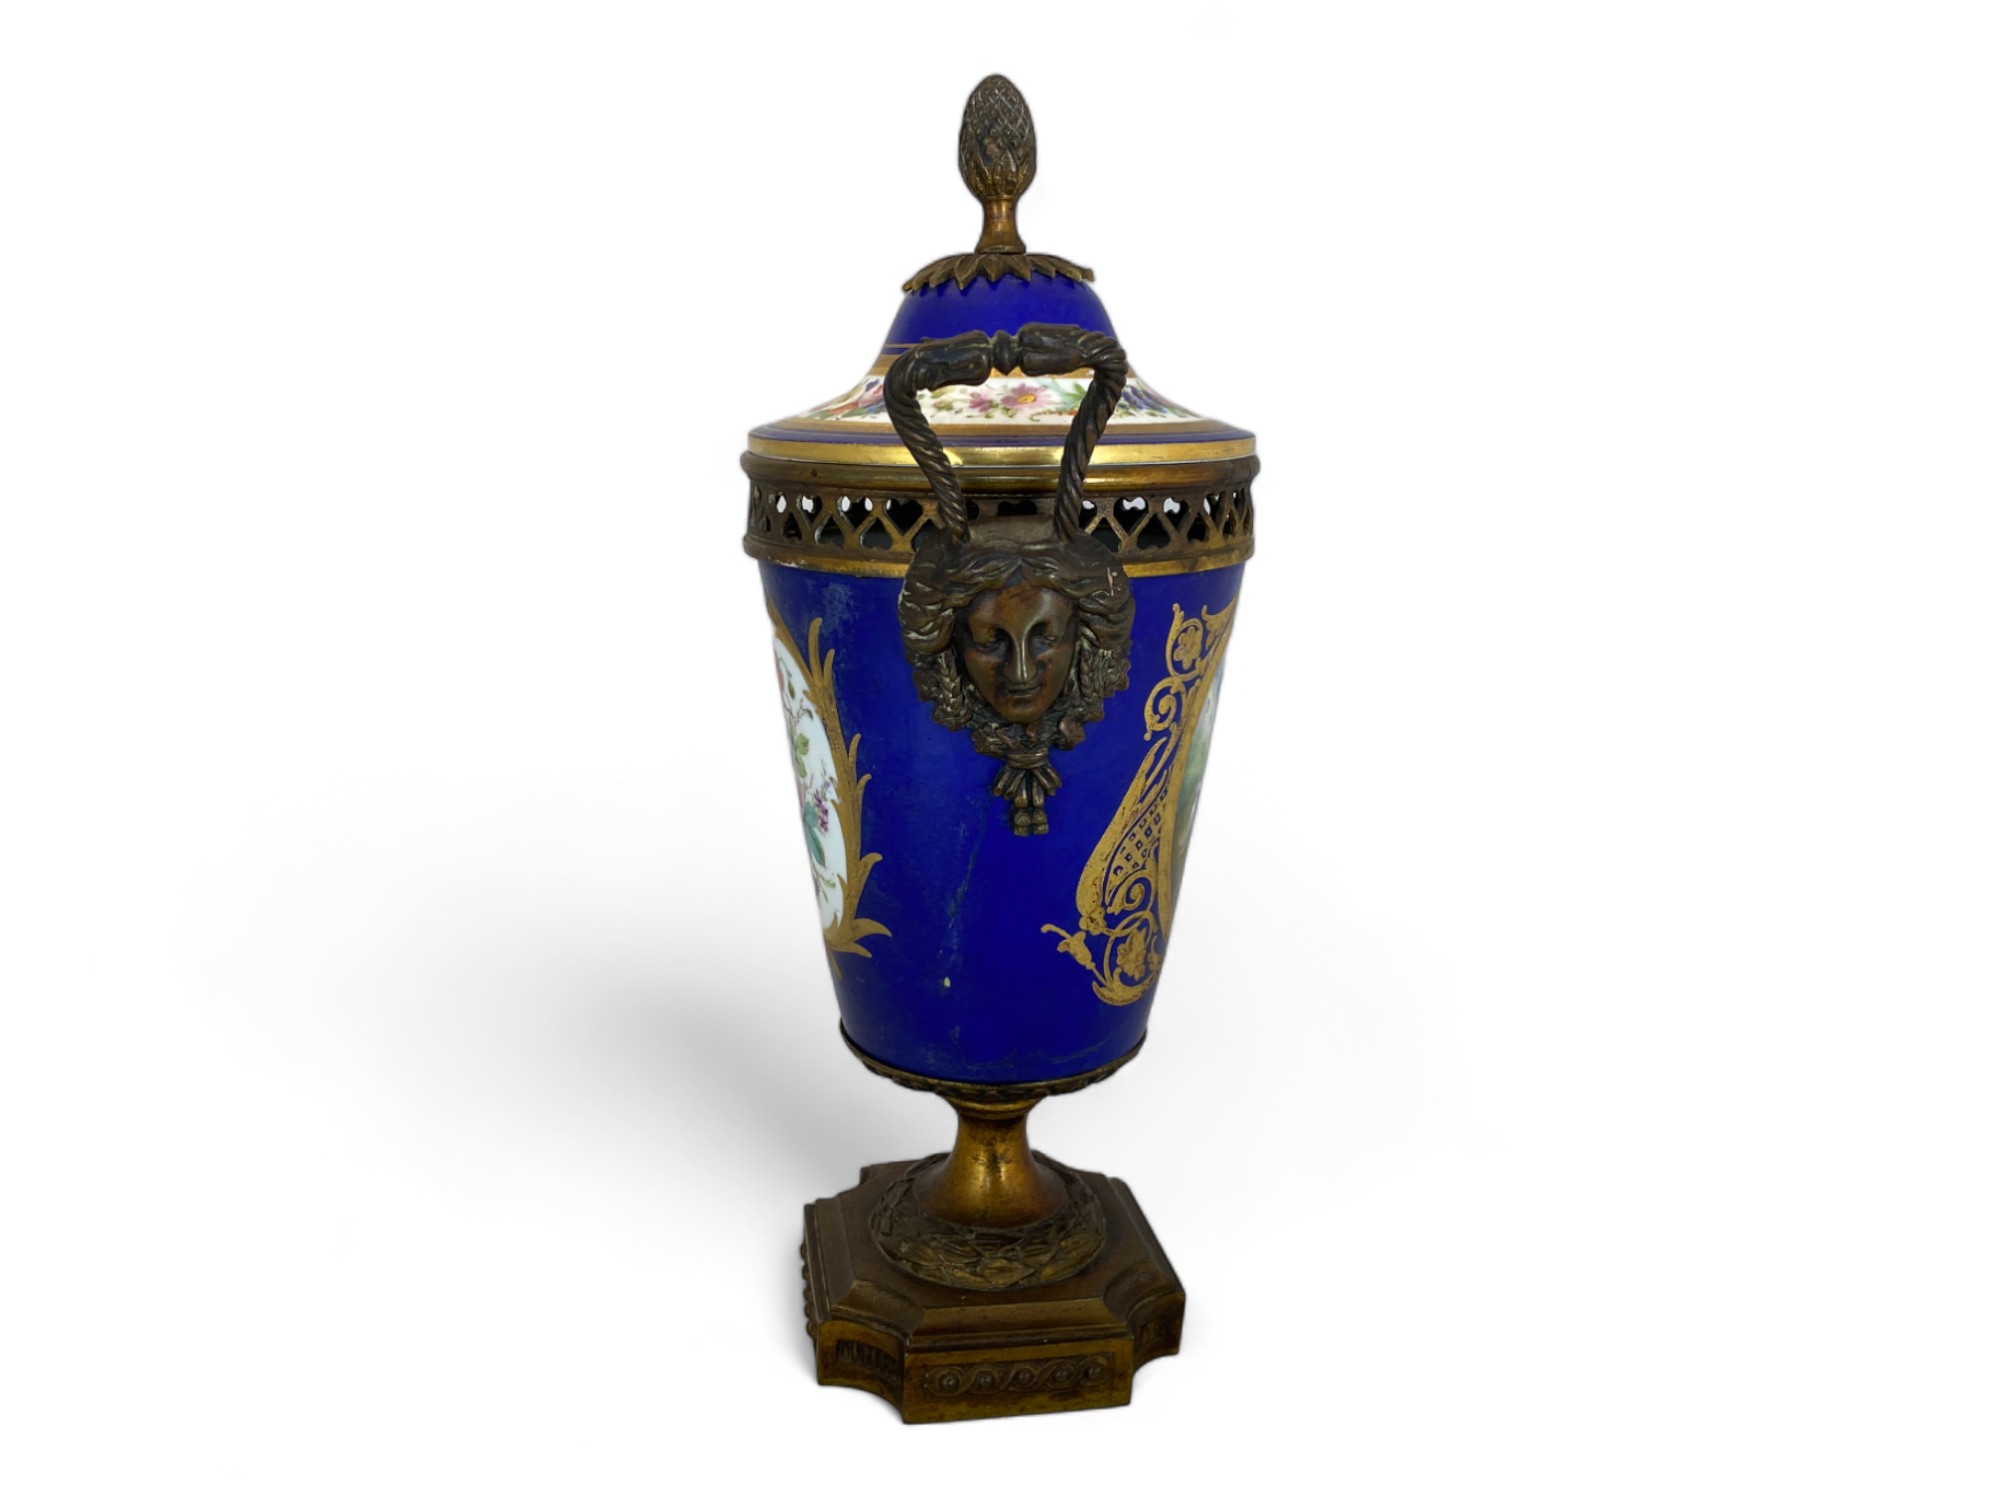 A 19th century Sèvres style porcelain and gilt bronze mounted beau bleu cup and cover - Image 4 of 10